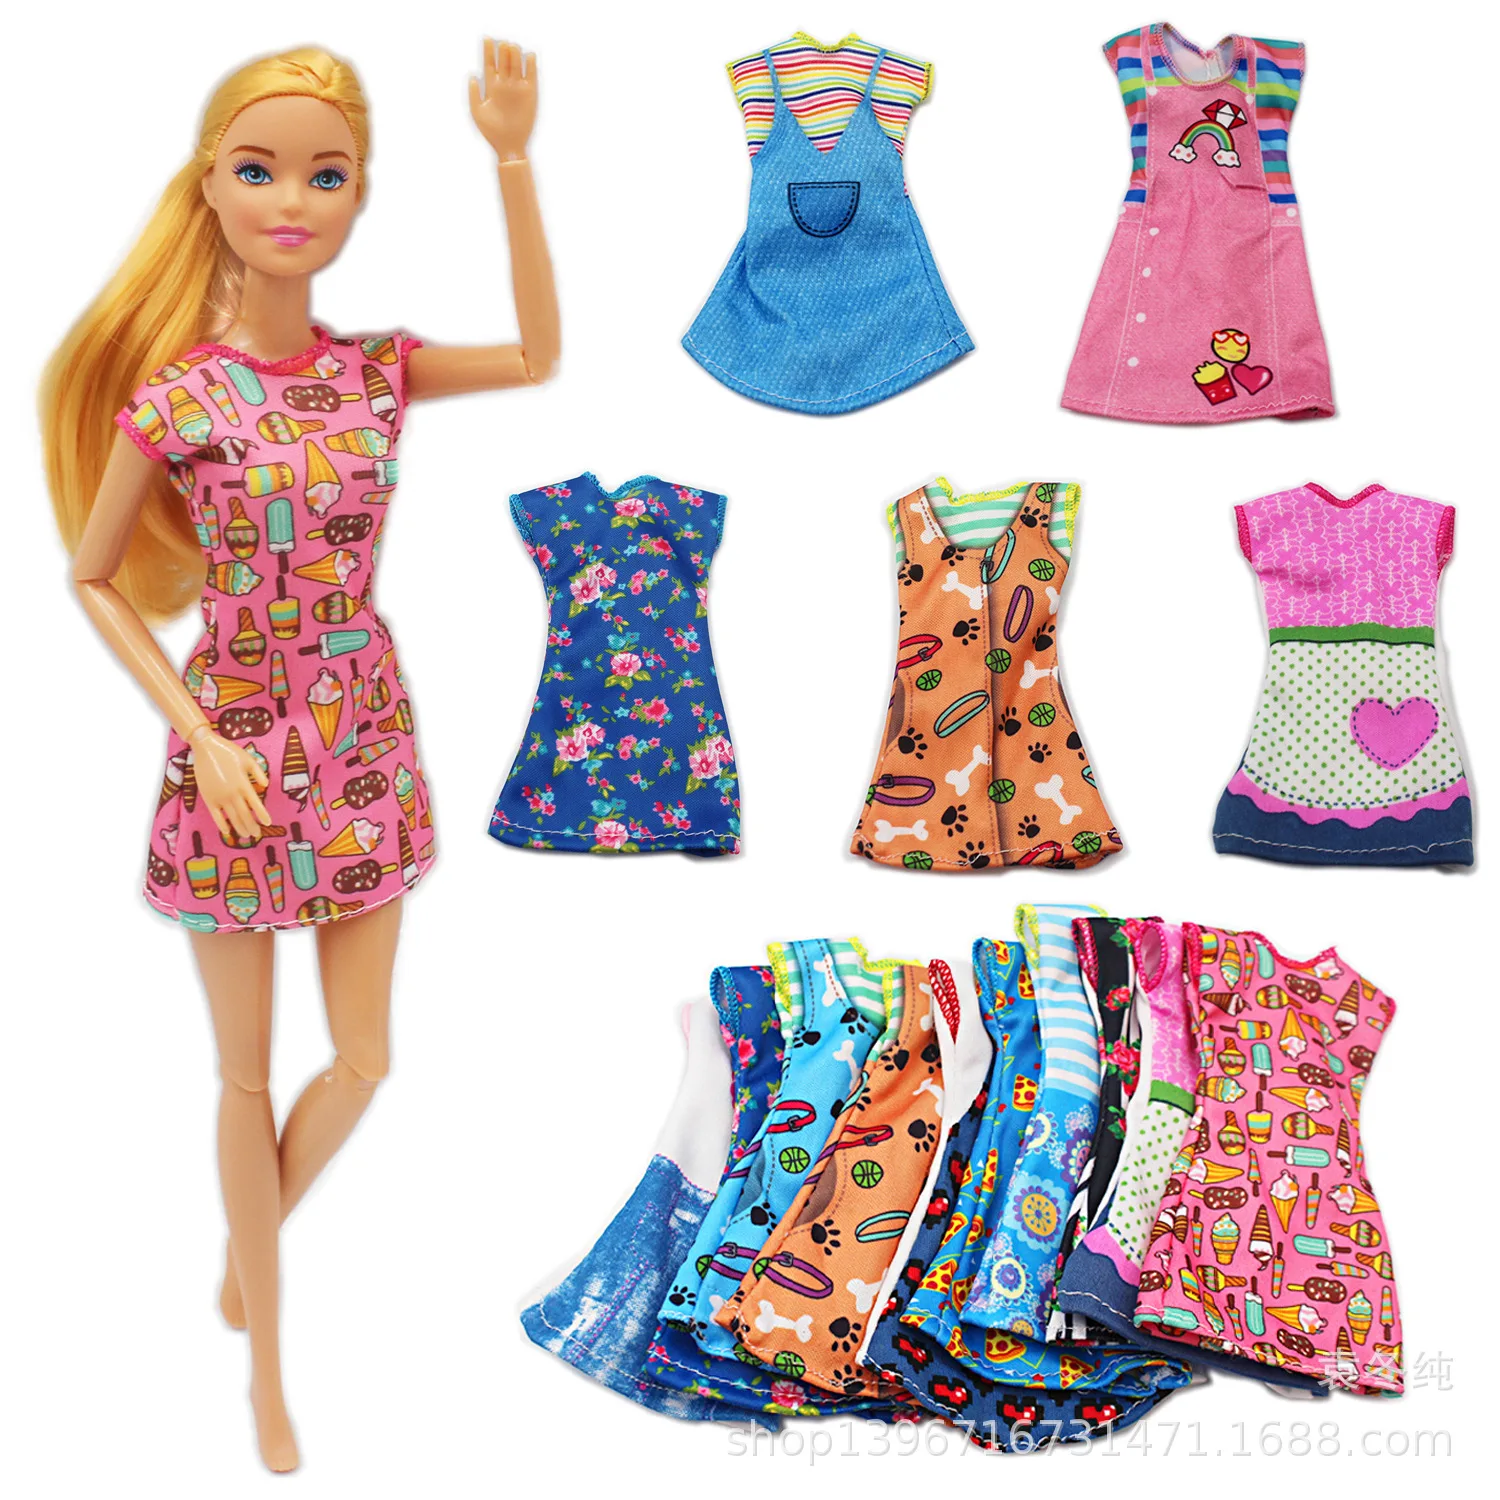 Barbie Original Mix Dolls Fashion Clothe Outfits dress elega Doll Shoes Set  Toys For Girls Children Accessories Play House Party